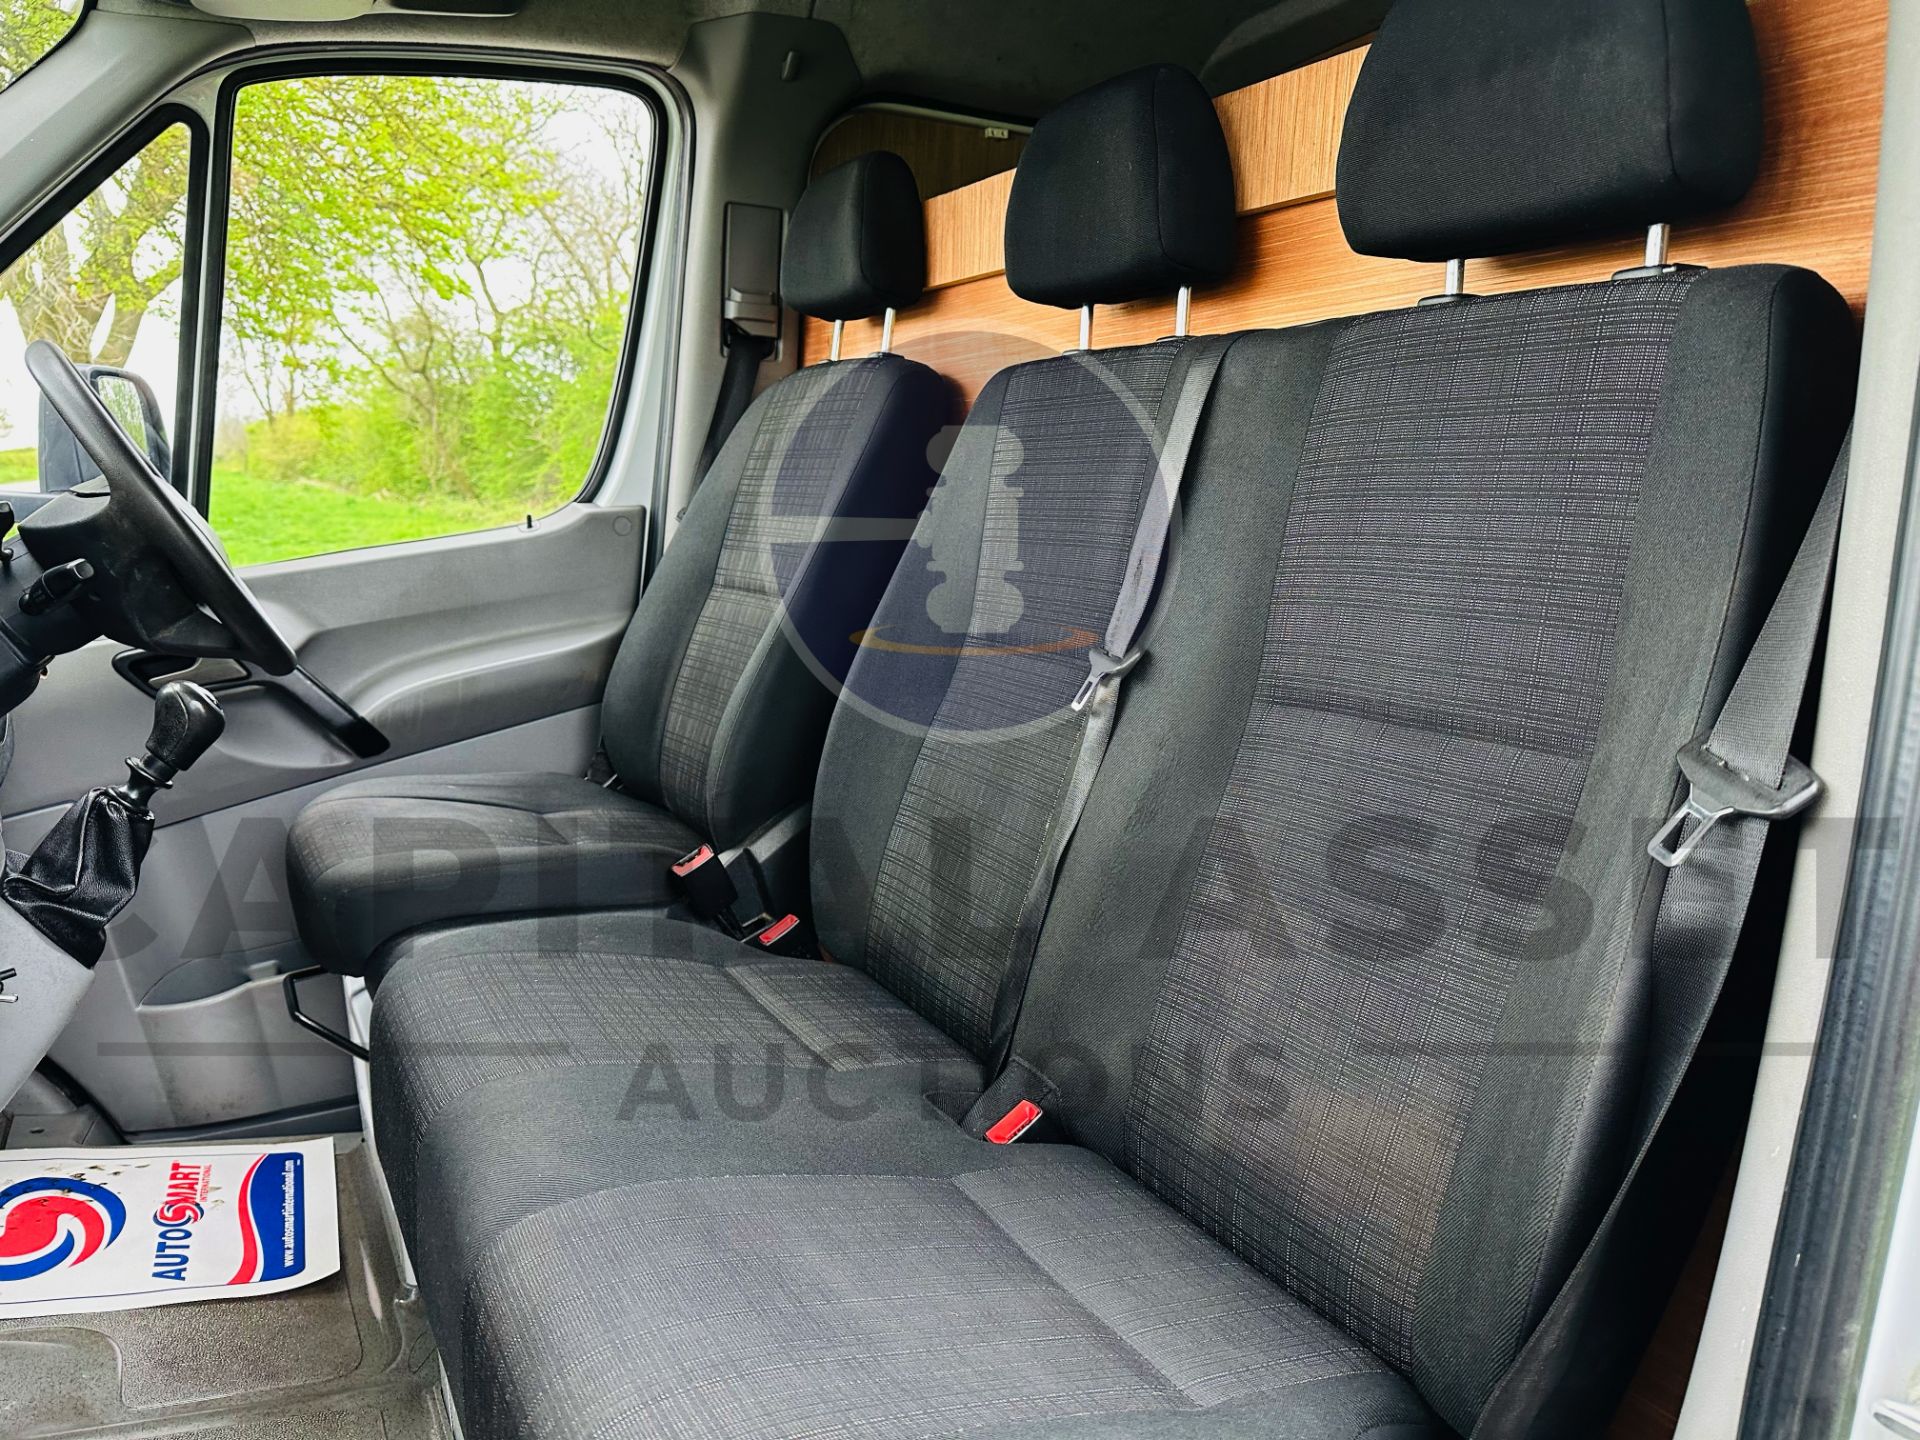 (ON SALE) MERCEDES SPRINTER 314 CDI *DOUBLE CAB TIPPER TRUCK* BLUETEC EDITION - 2019 MODEL 35K MILES - Image 16 of 31